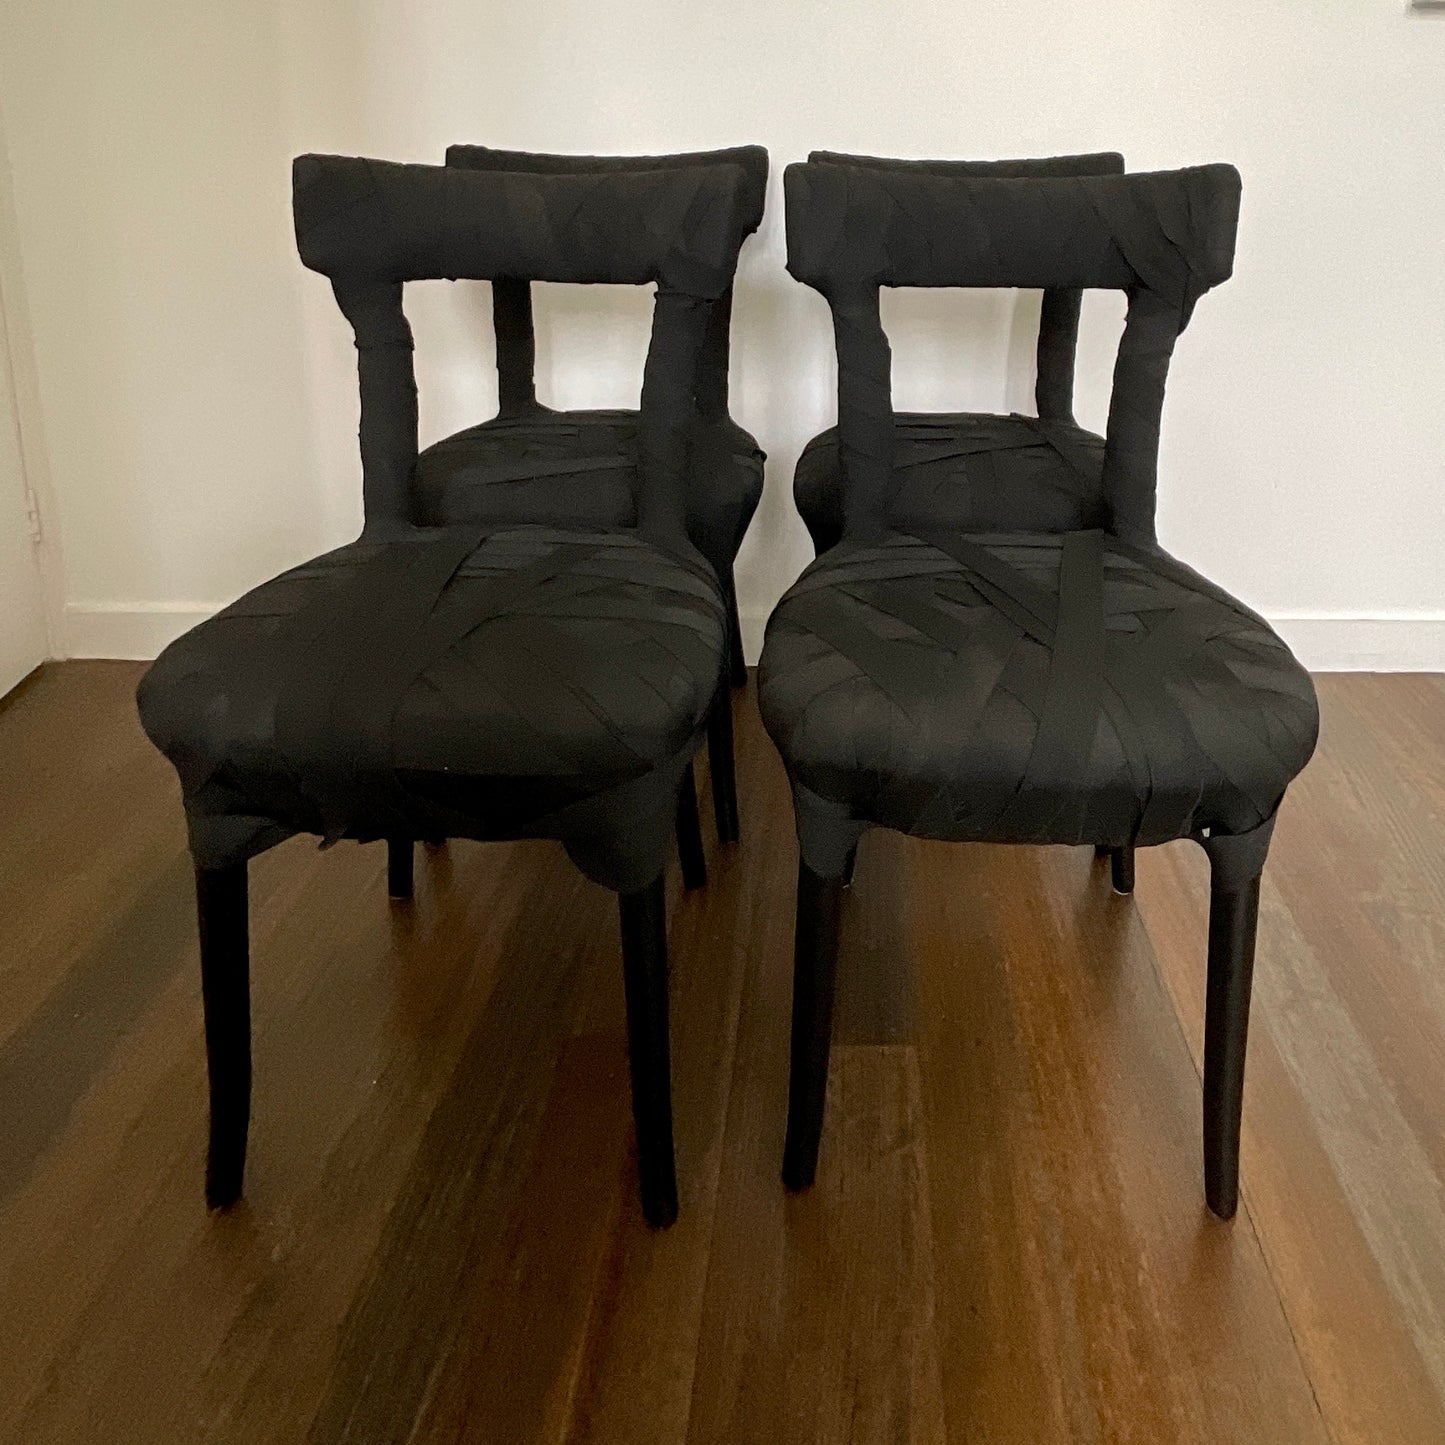 Load image into Gallery viewer, Set of FOUR Mummy Chairs by Peter Traag for Edra (2 sets available)
